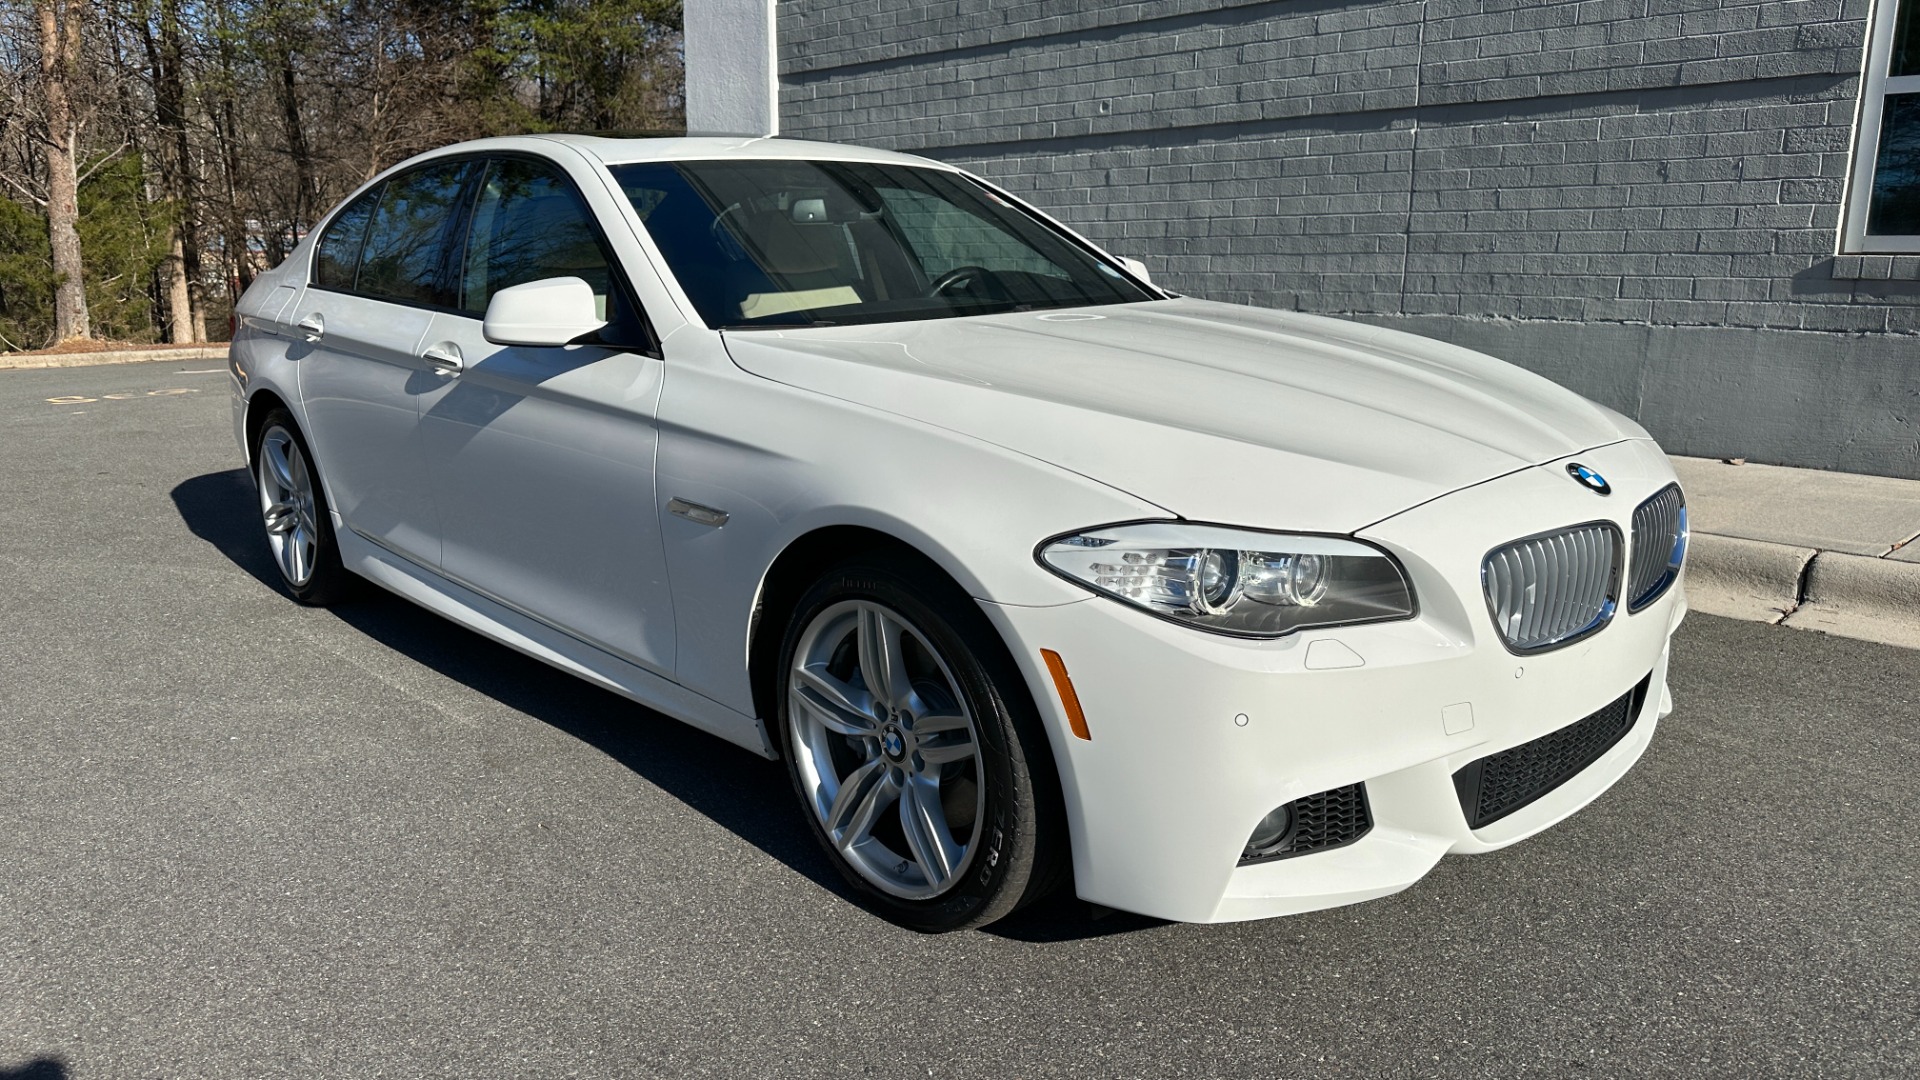 Used 2012 BMW 5 Series 550i M SPORT / PREMIUM SOUND / CONVENIENCE / HEADS UP DISPLAY / HEATED SEAT for sale $20,995 at Formula Imports in Charlotte NC 28227 7